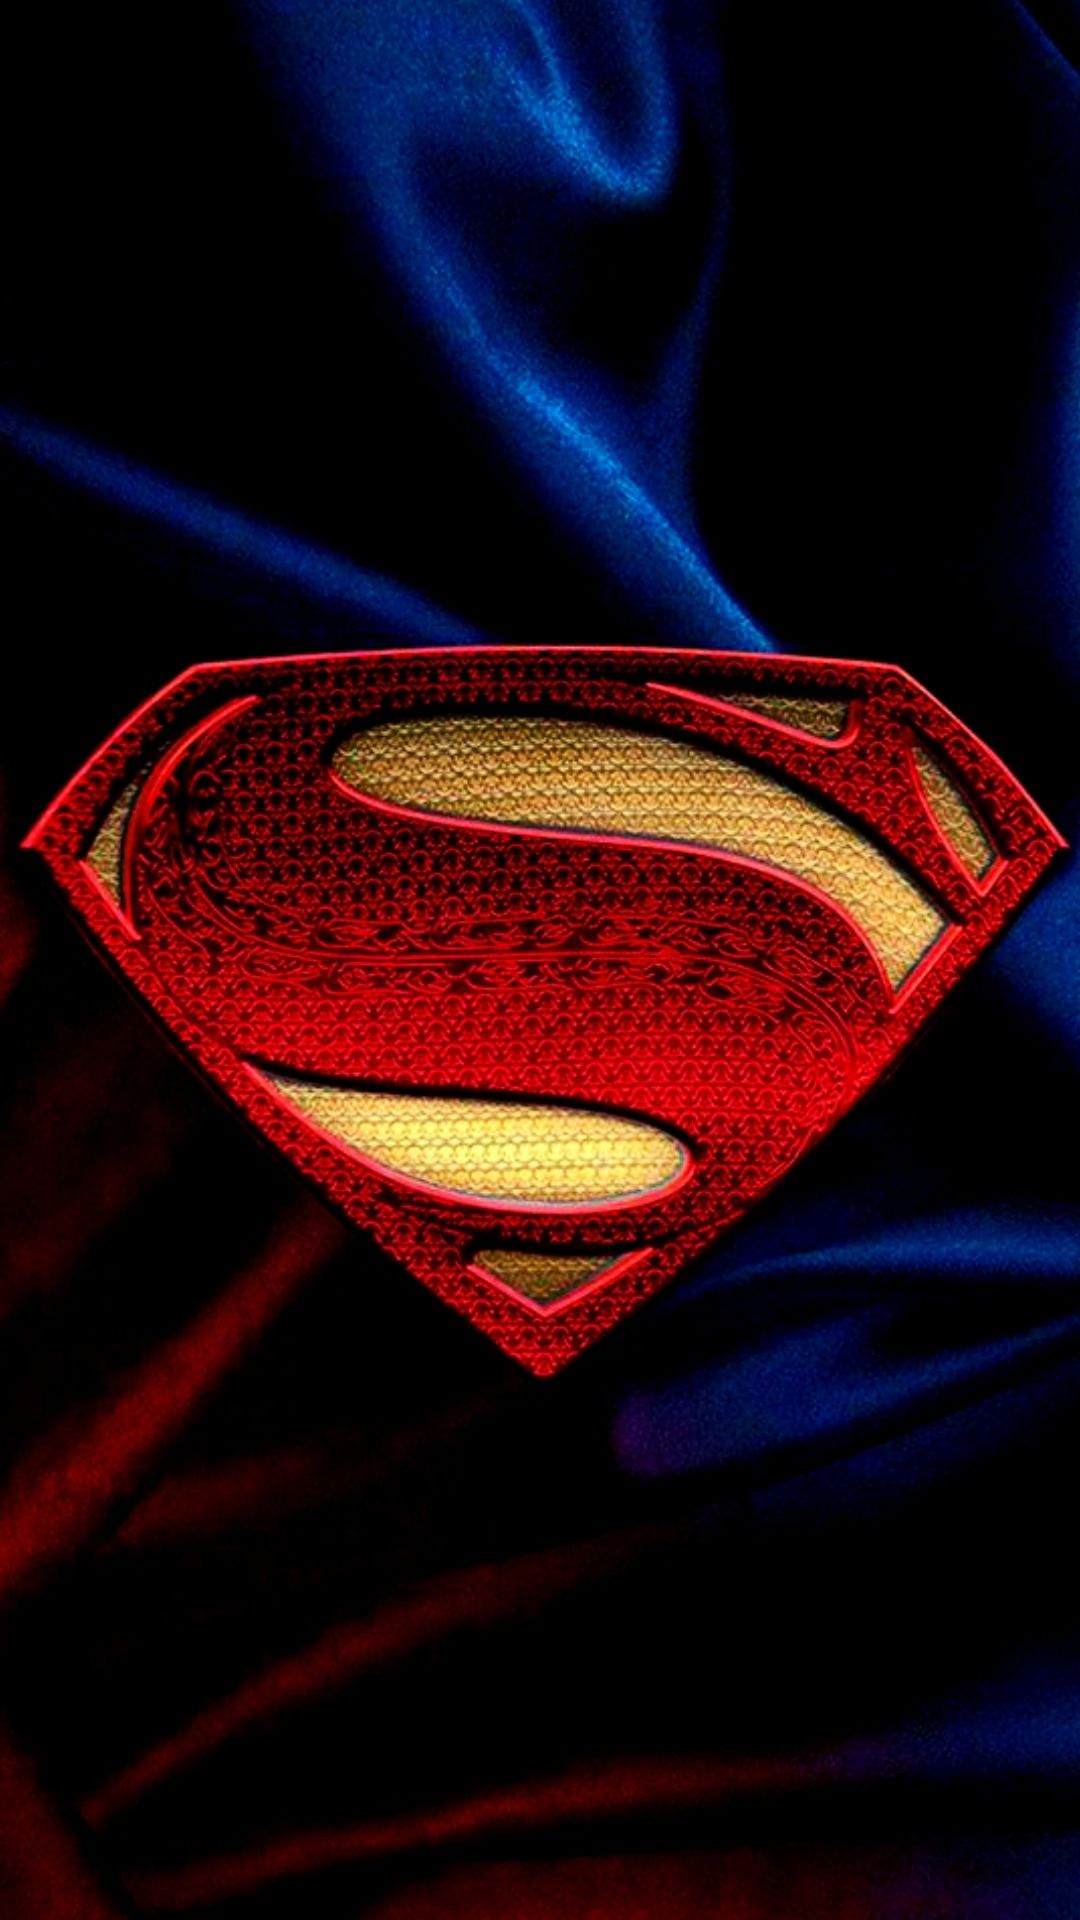 Samsung Galaxy A7 Wallpaper Superman Mobile Android Backgrounds